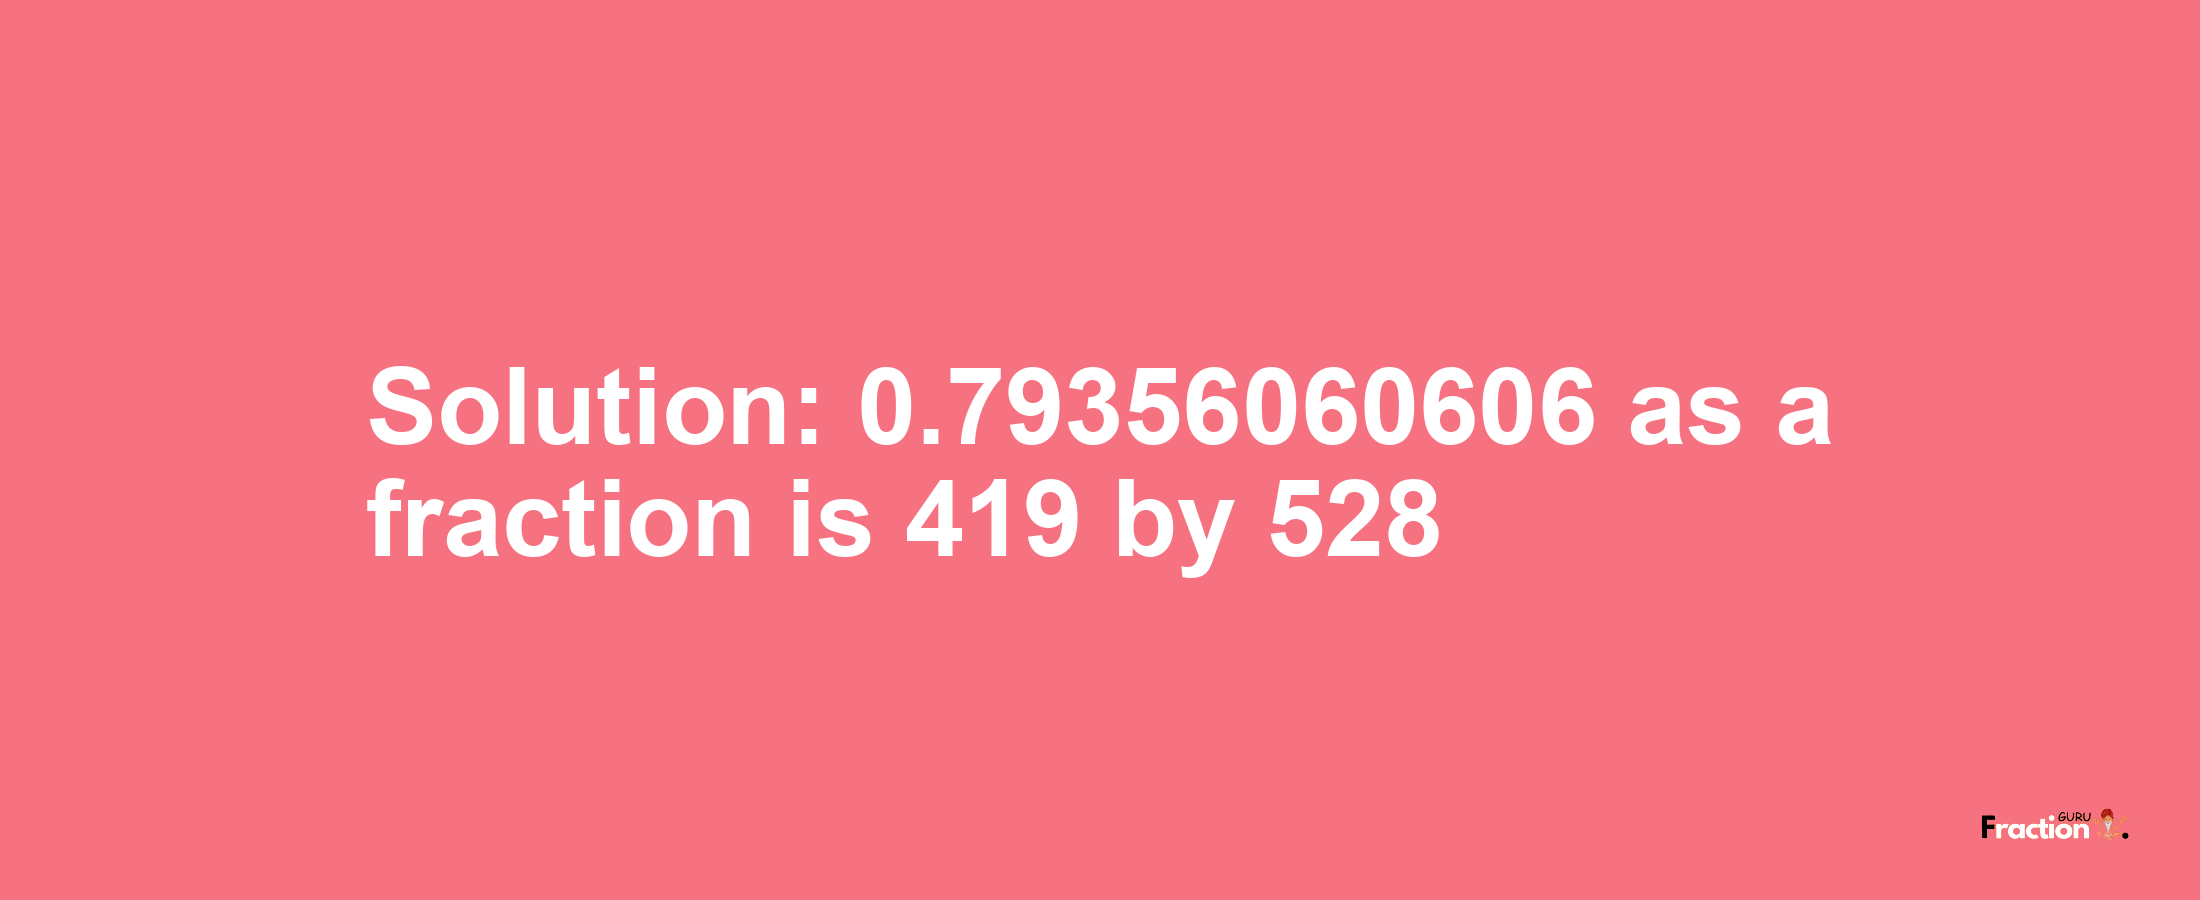 Solution:0.79356060606 as a fraction is 419/528